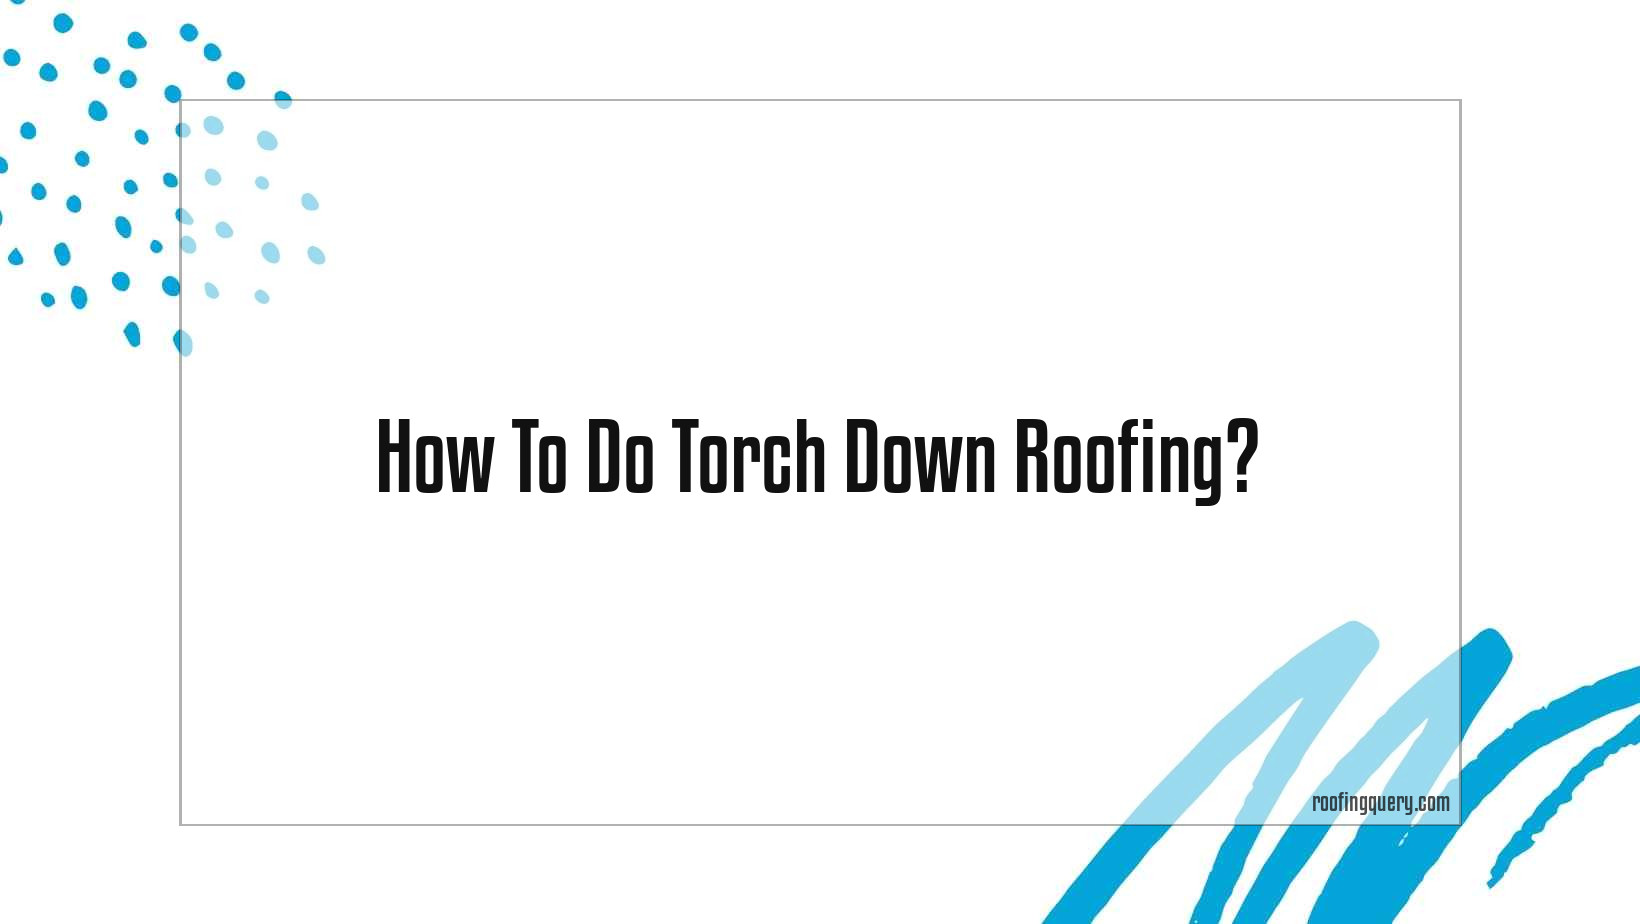 How To Do Torch Down Roofing?